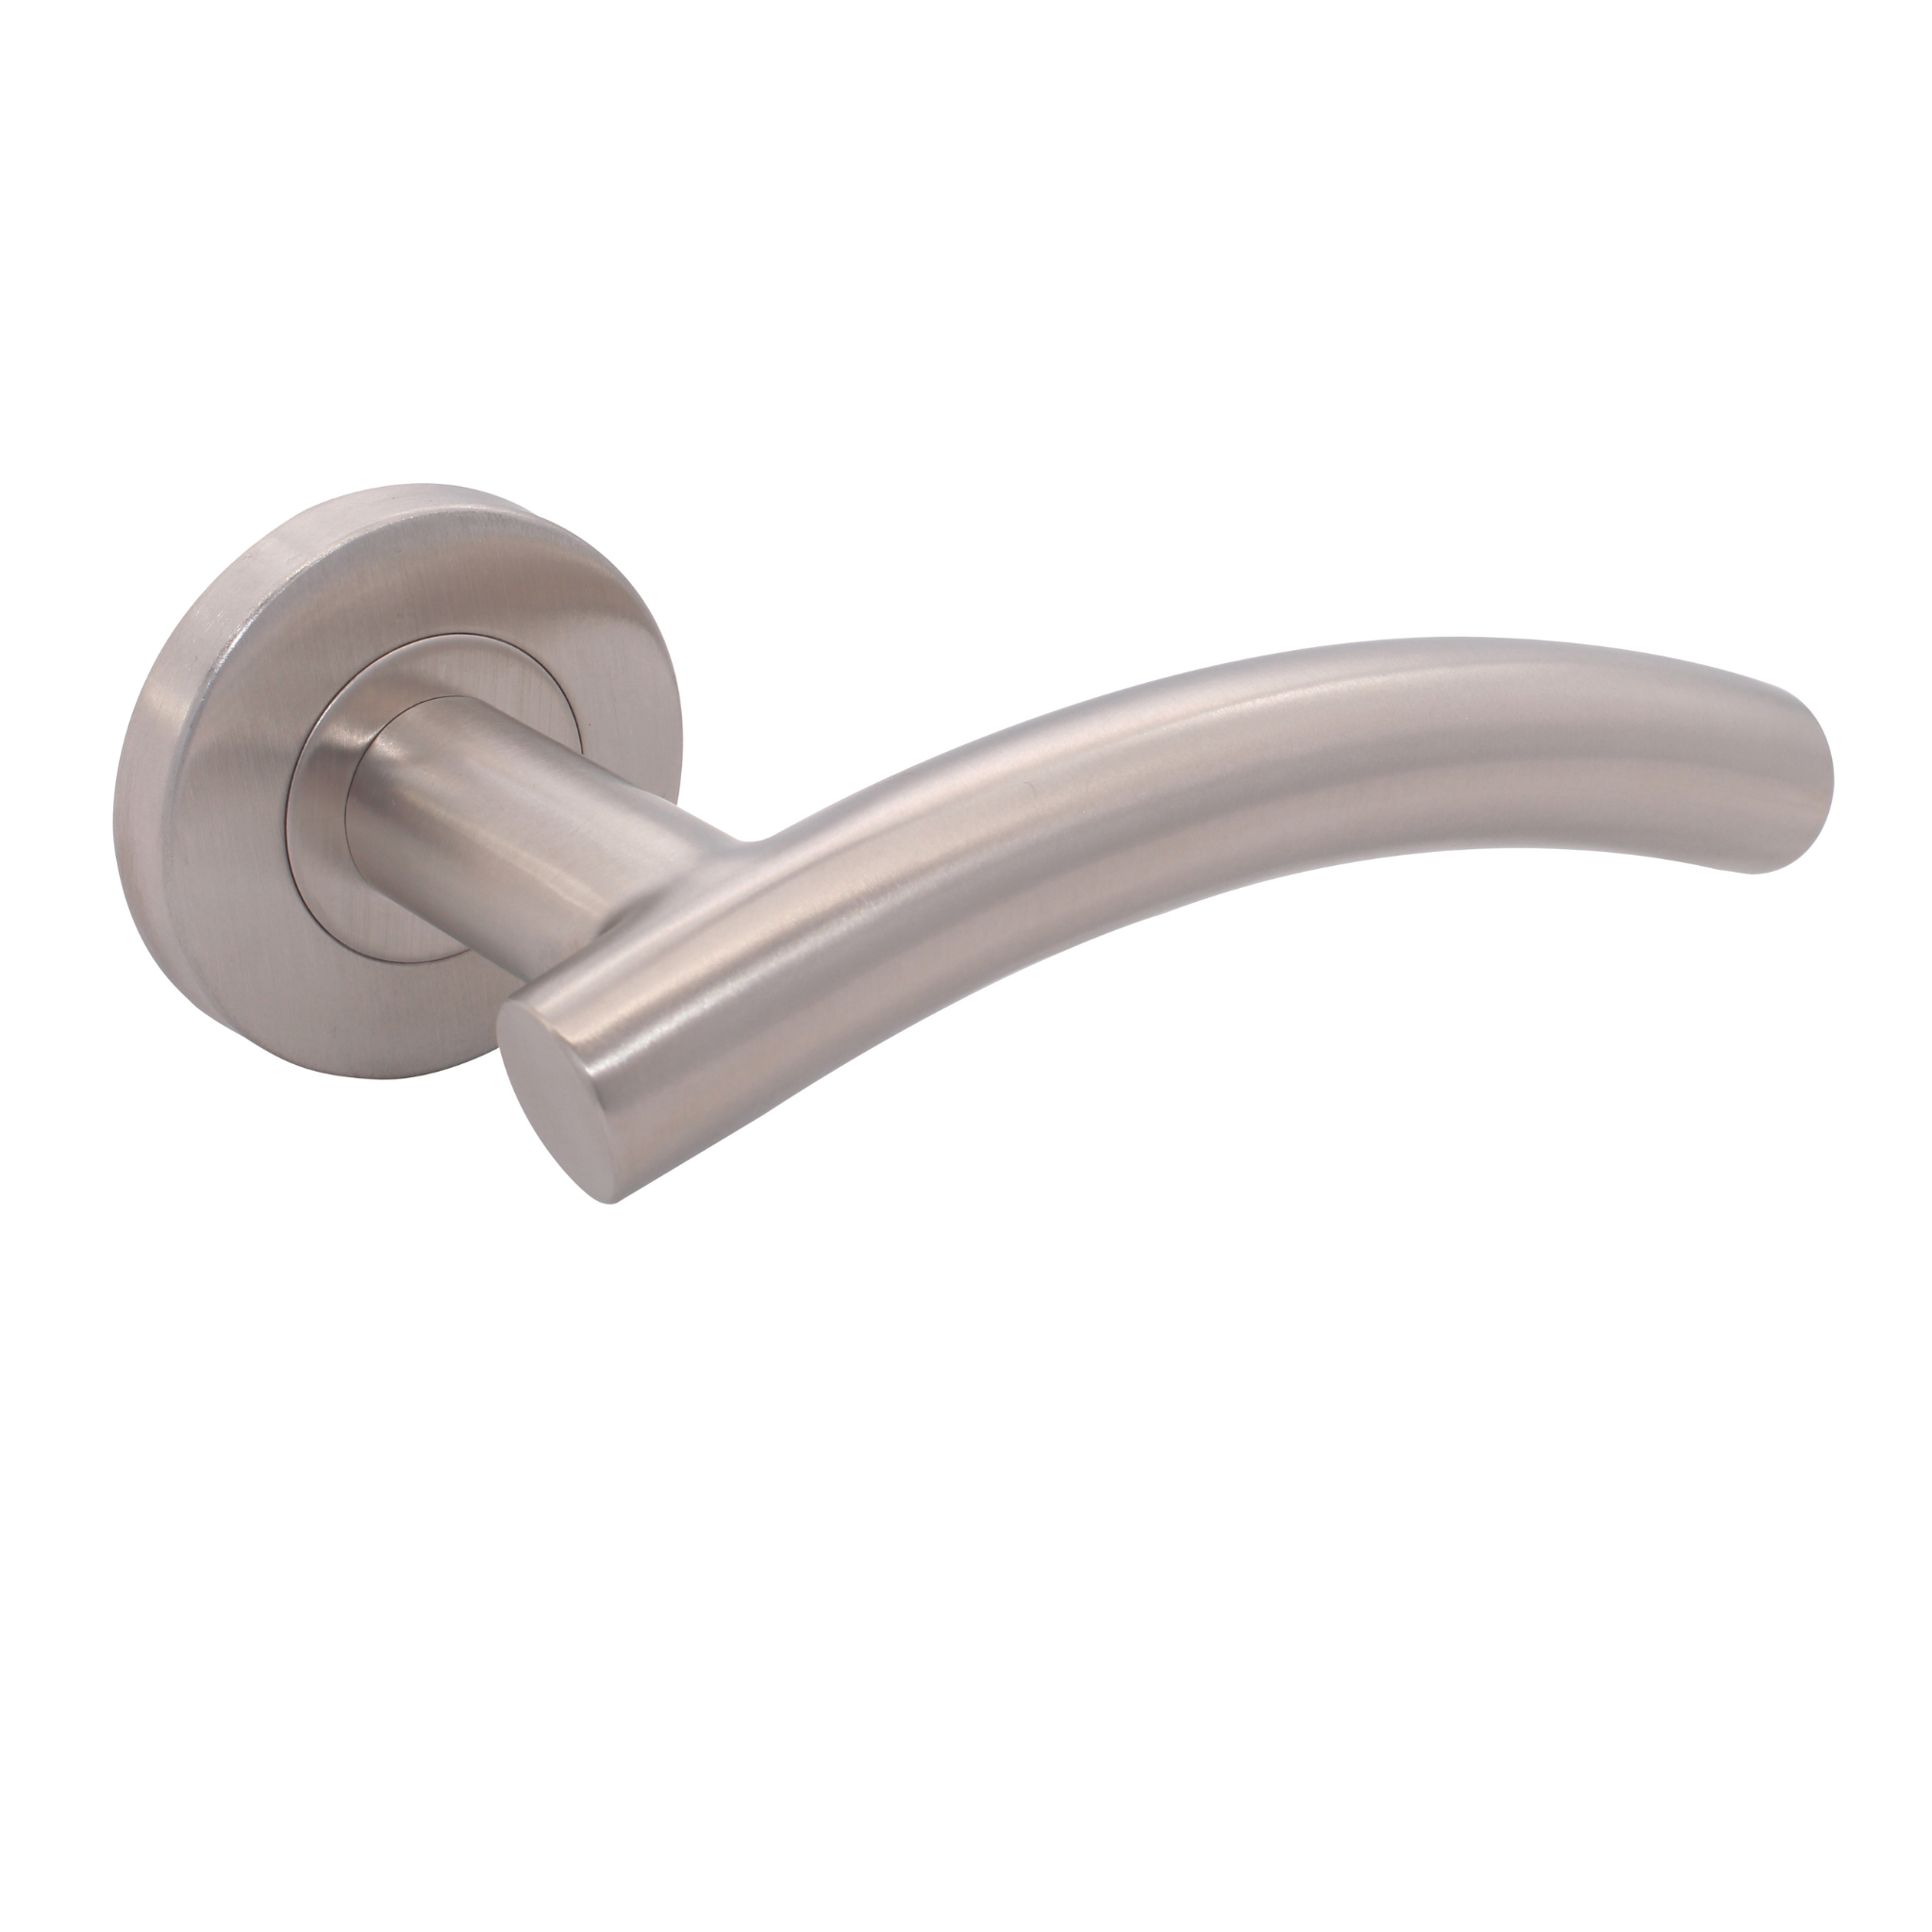 FT05.R._.SS, Lever Handles, Tubular, On Round Rose, With Escutcheons, 138mm (l), Stainless Steel, CISA